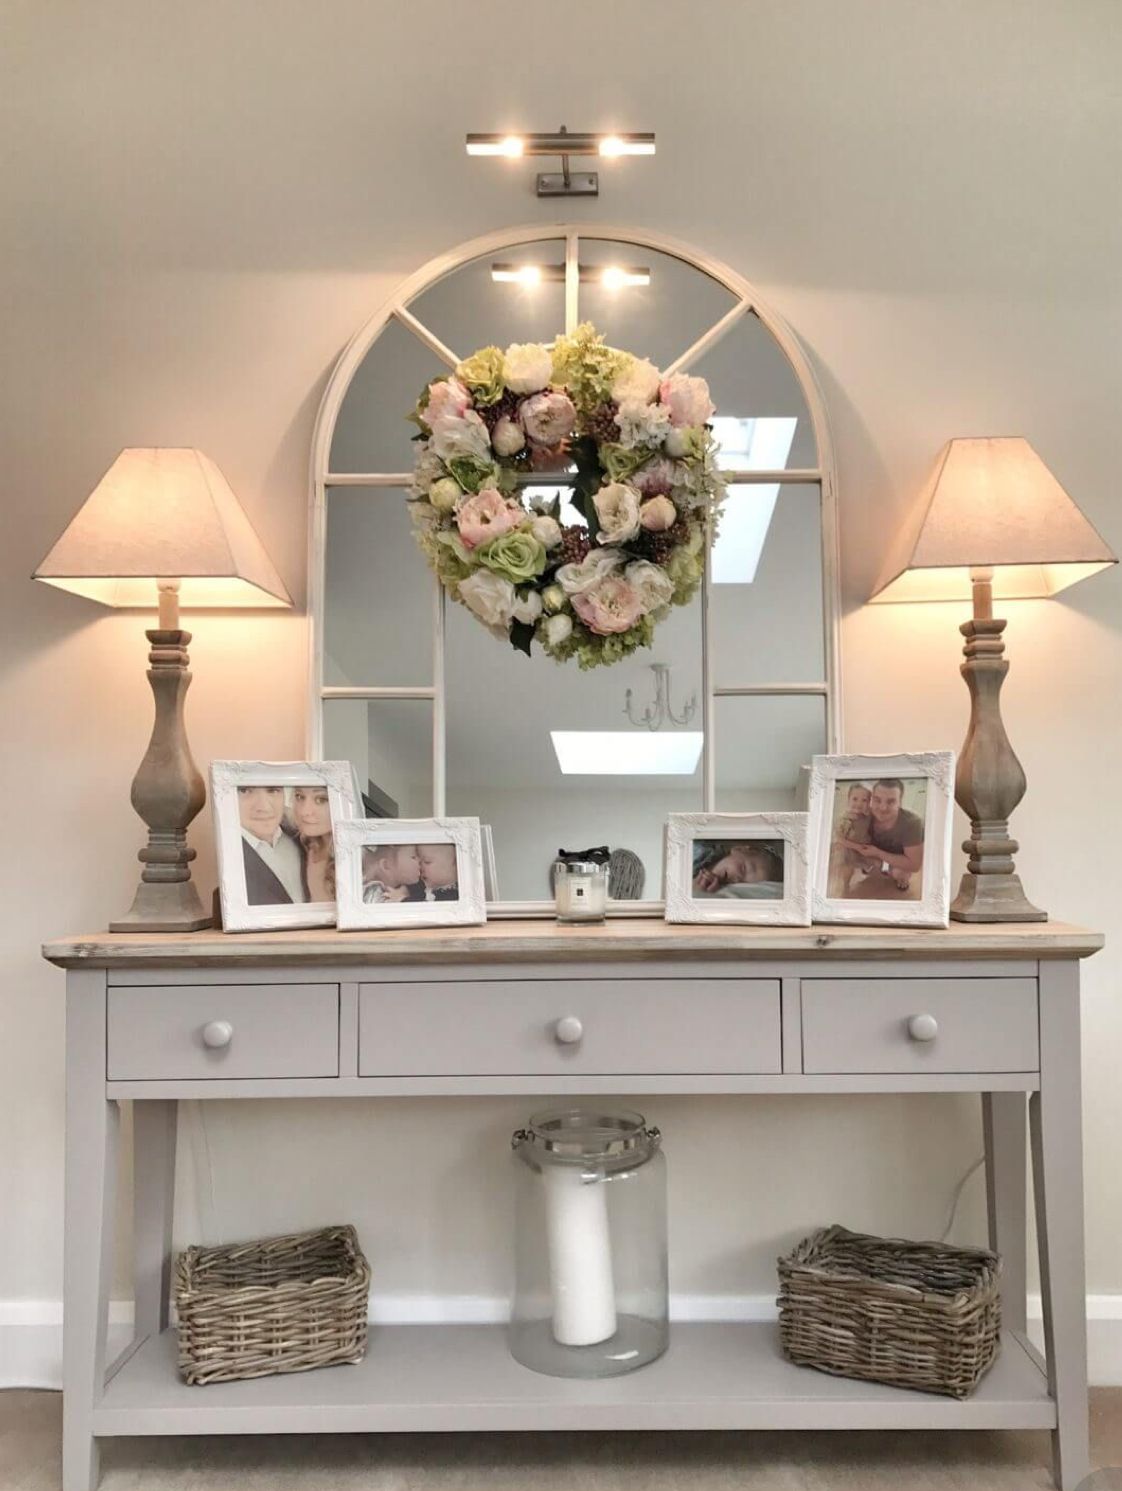 Entryway table adorned with a beautiful floral centerpiece as a focal point